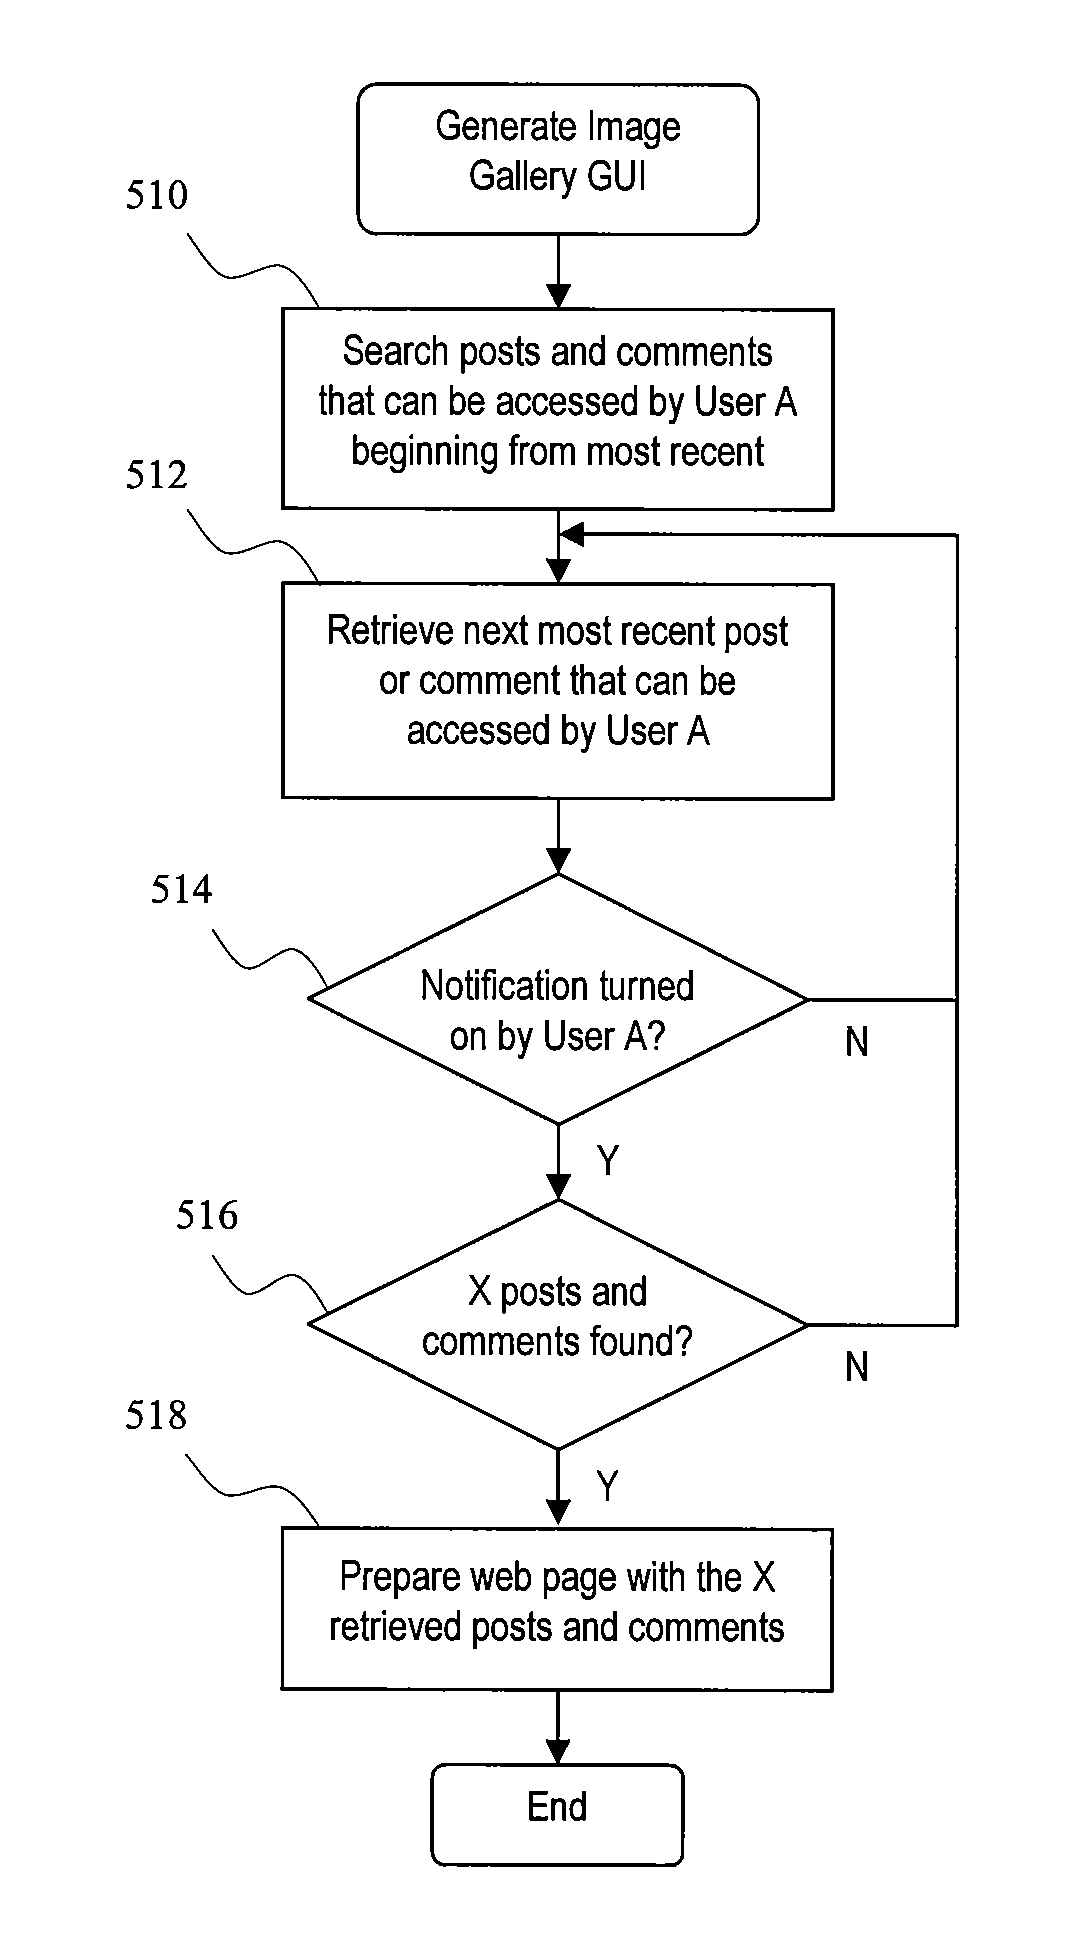 System and Method for Facilitating Collaborative Generation of Life Stories